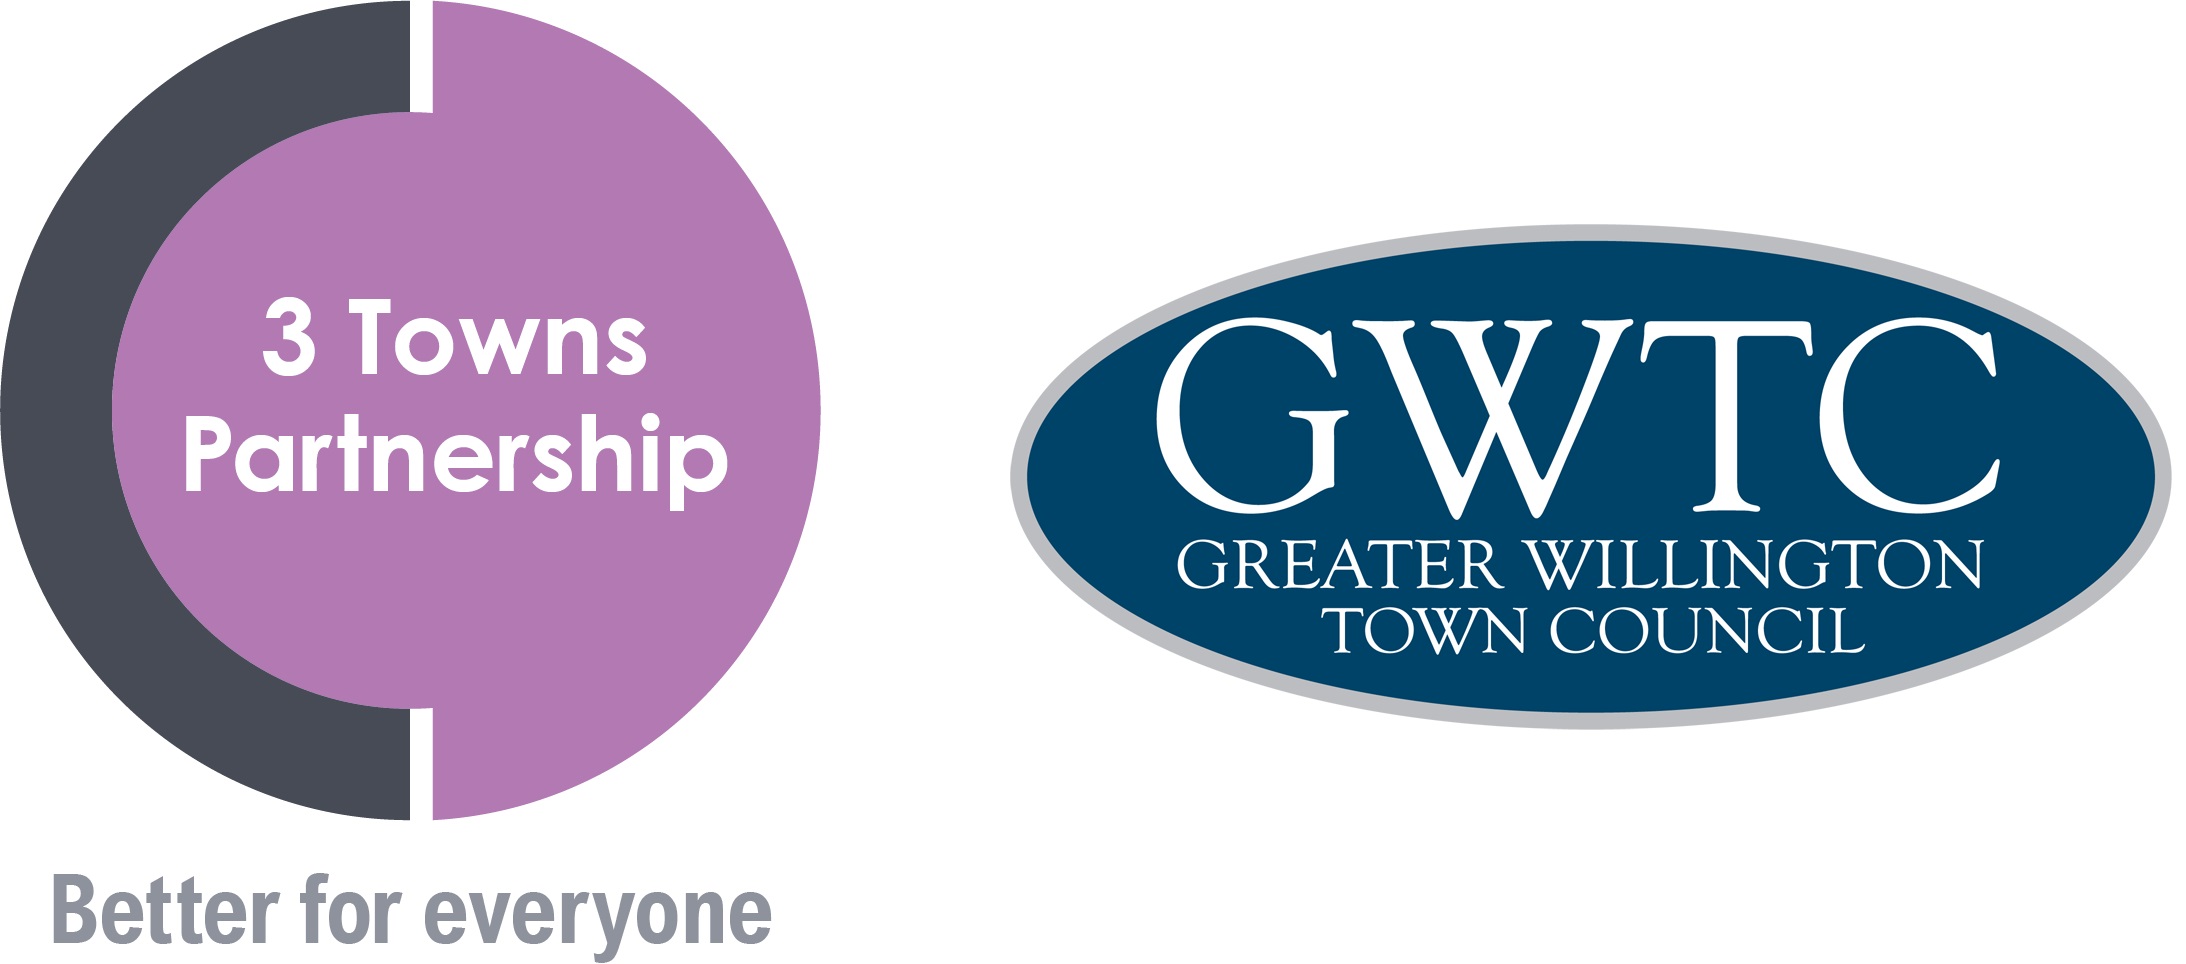 3 Towns Partnership. Better for Everyone. GWTC Greater Willington Town Council.